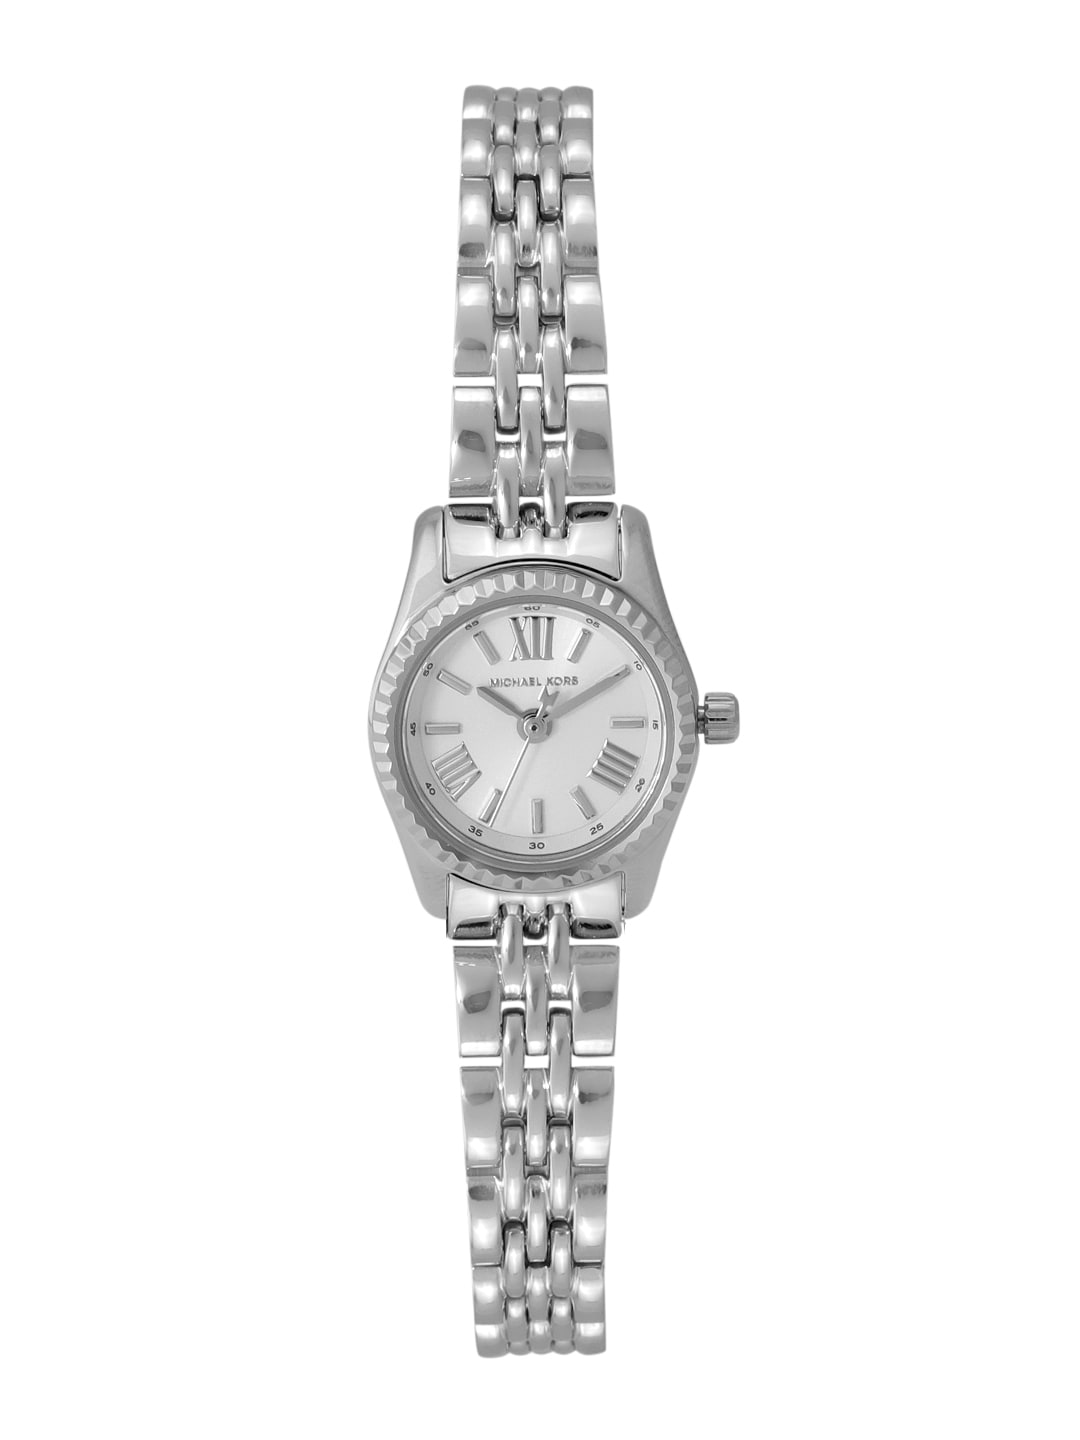 Michael Kors Women White Dial & Silver-Toned Bracelet Style Analogue Watch MK4487 Price in India